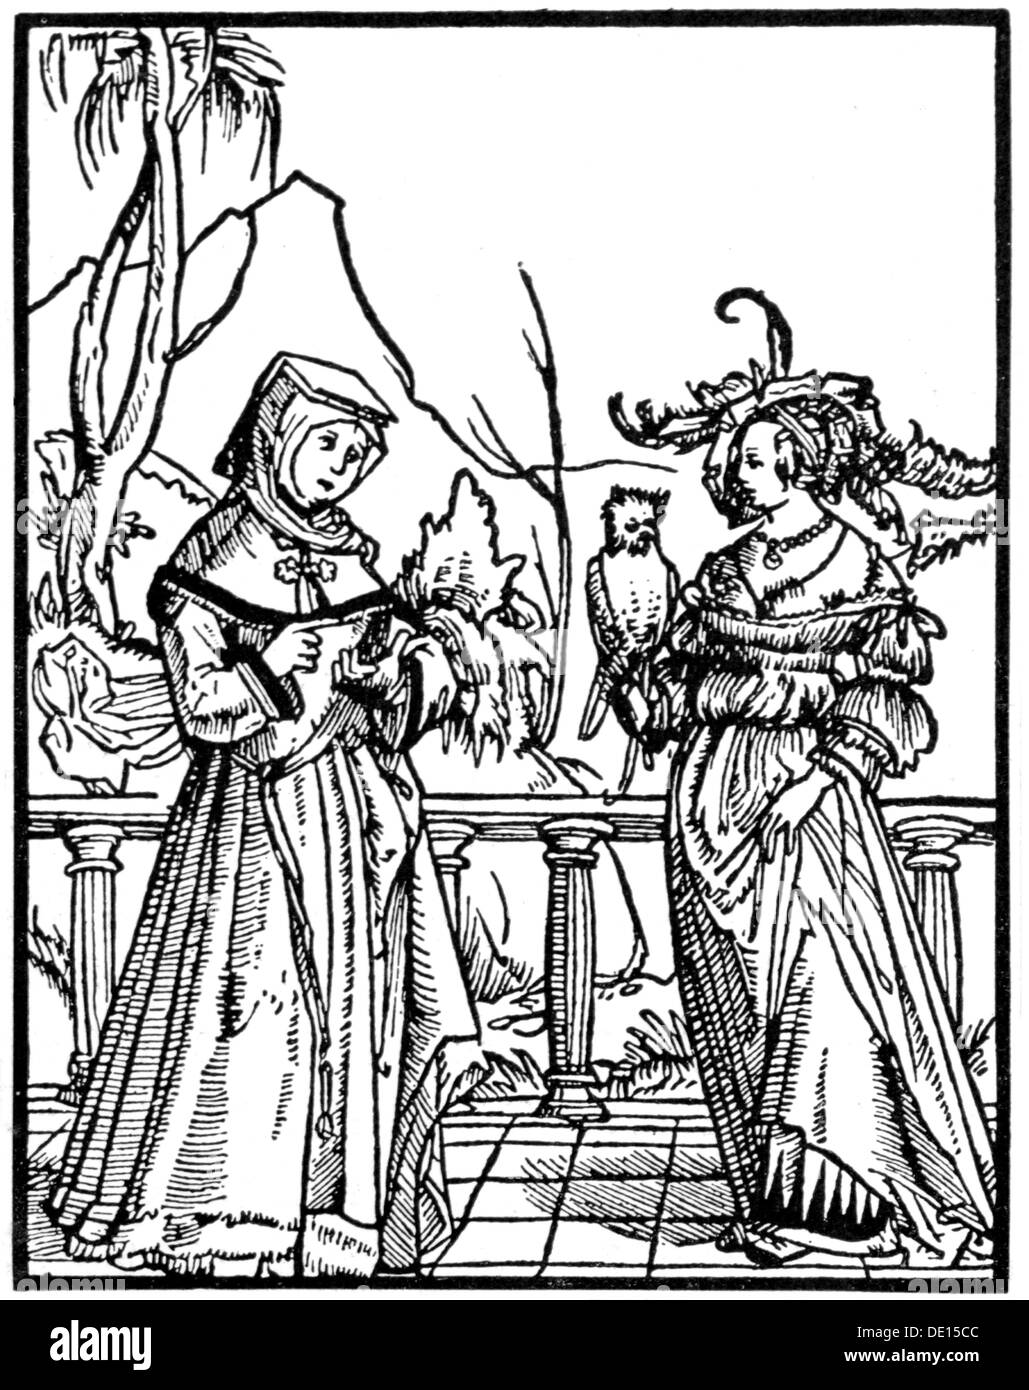 fashion, 16th century, 'Klag wyplicher scham' (Lament on Female Sense of Shame), woodcut, 16th century, Additional-Rights-Clearences-Not Available Stock Photo